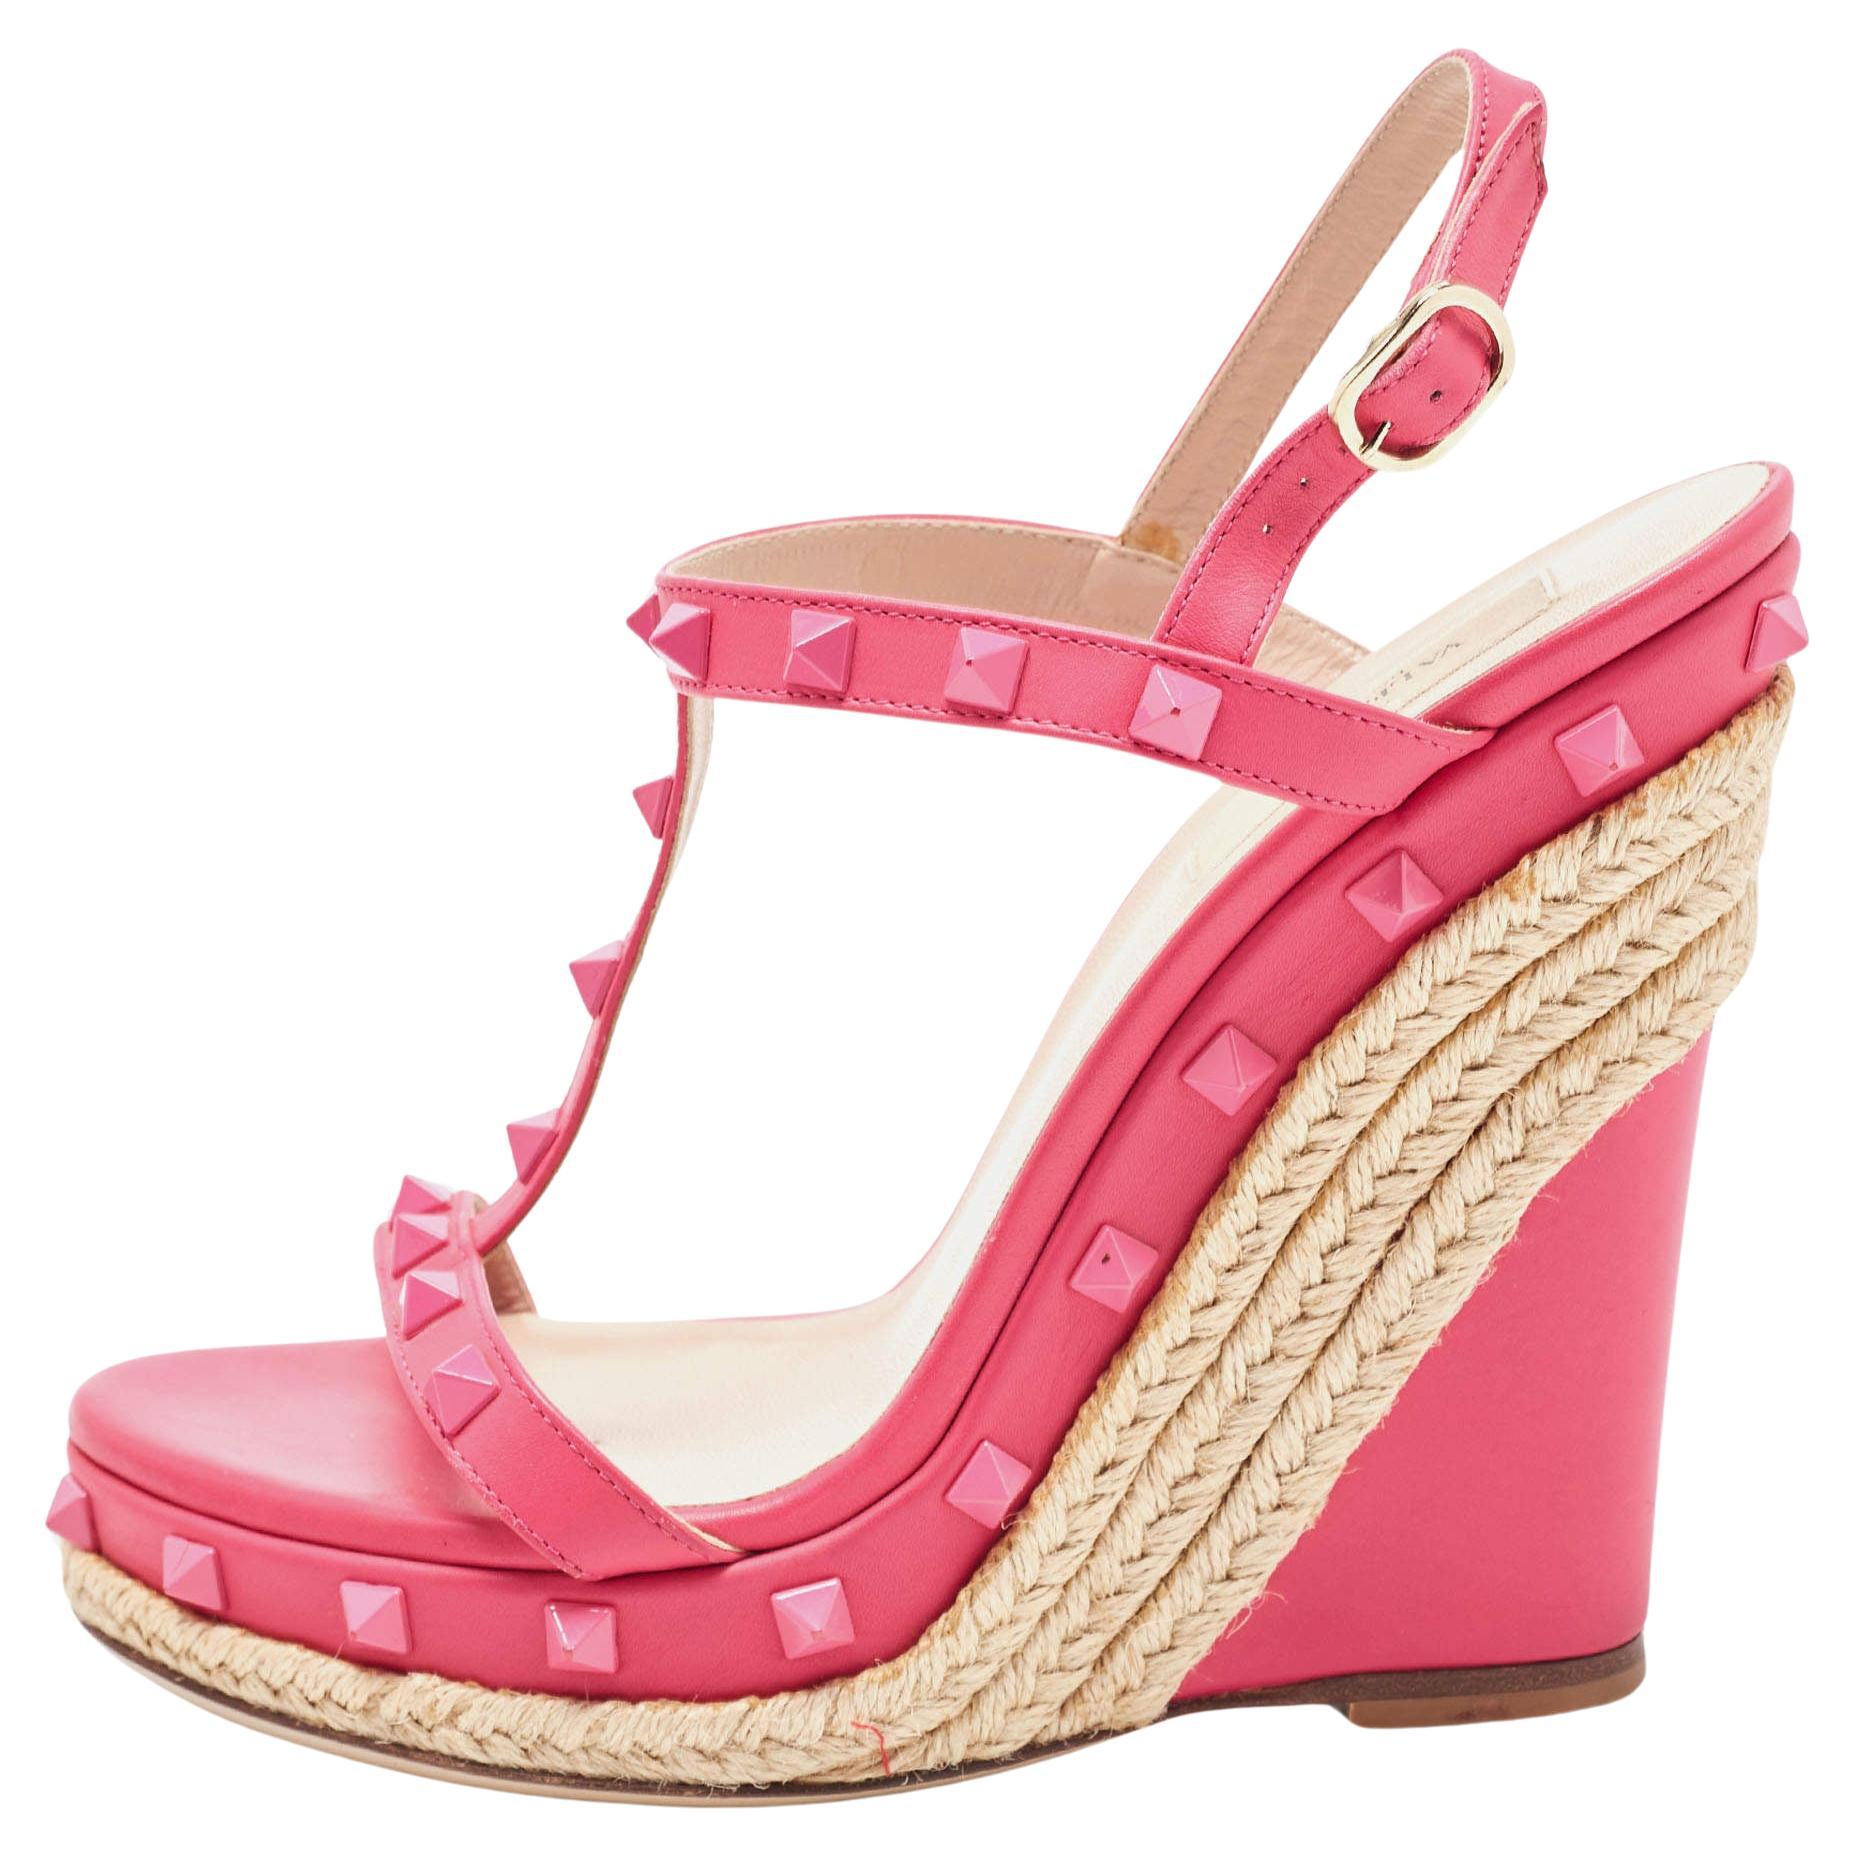 Valentino Pink Leather Rockstud Wedge Ankle Sandals Size 38.5